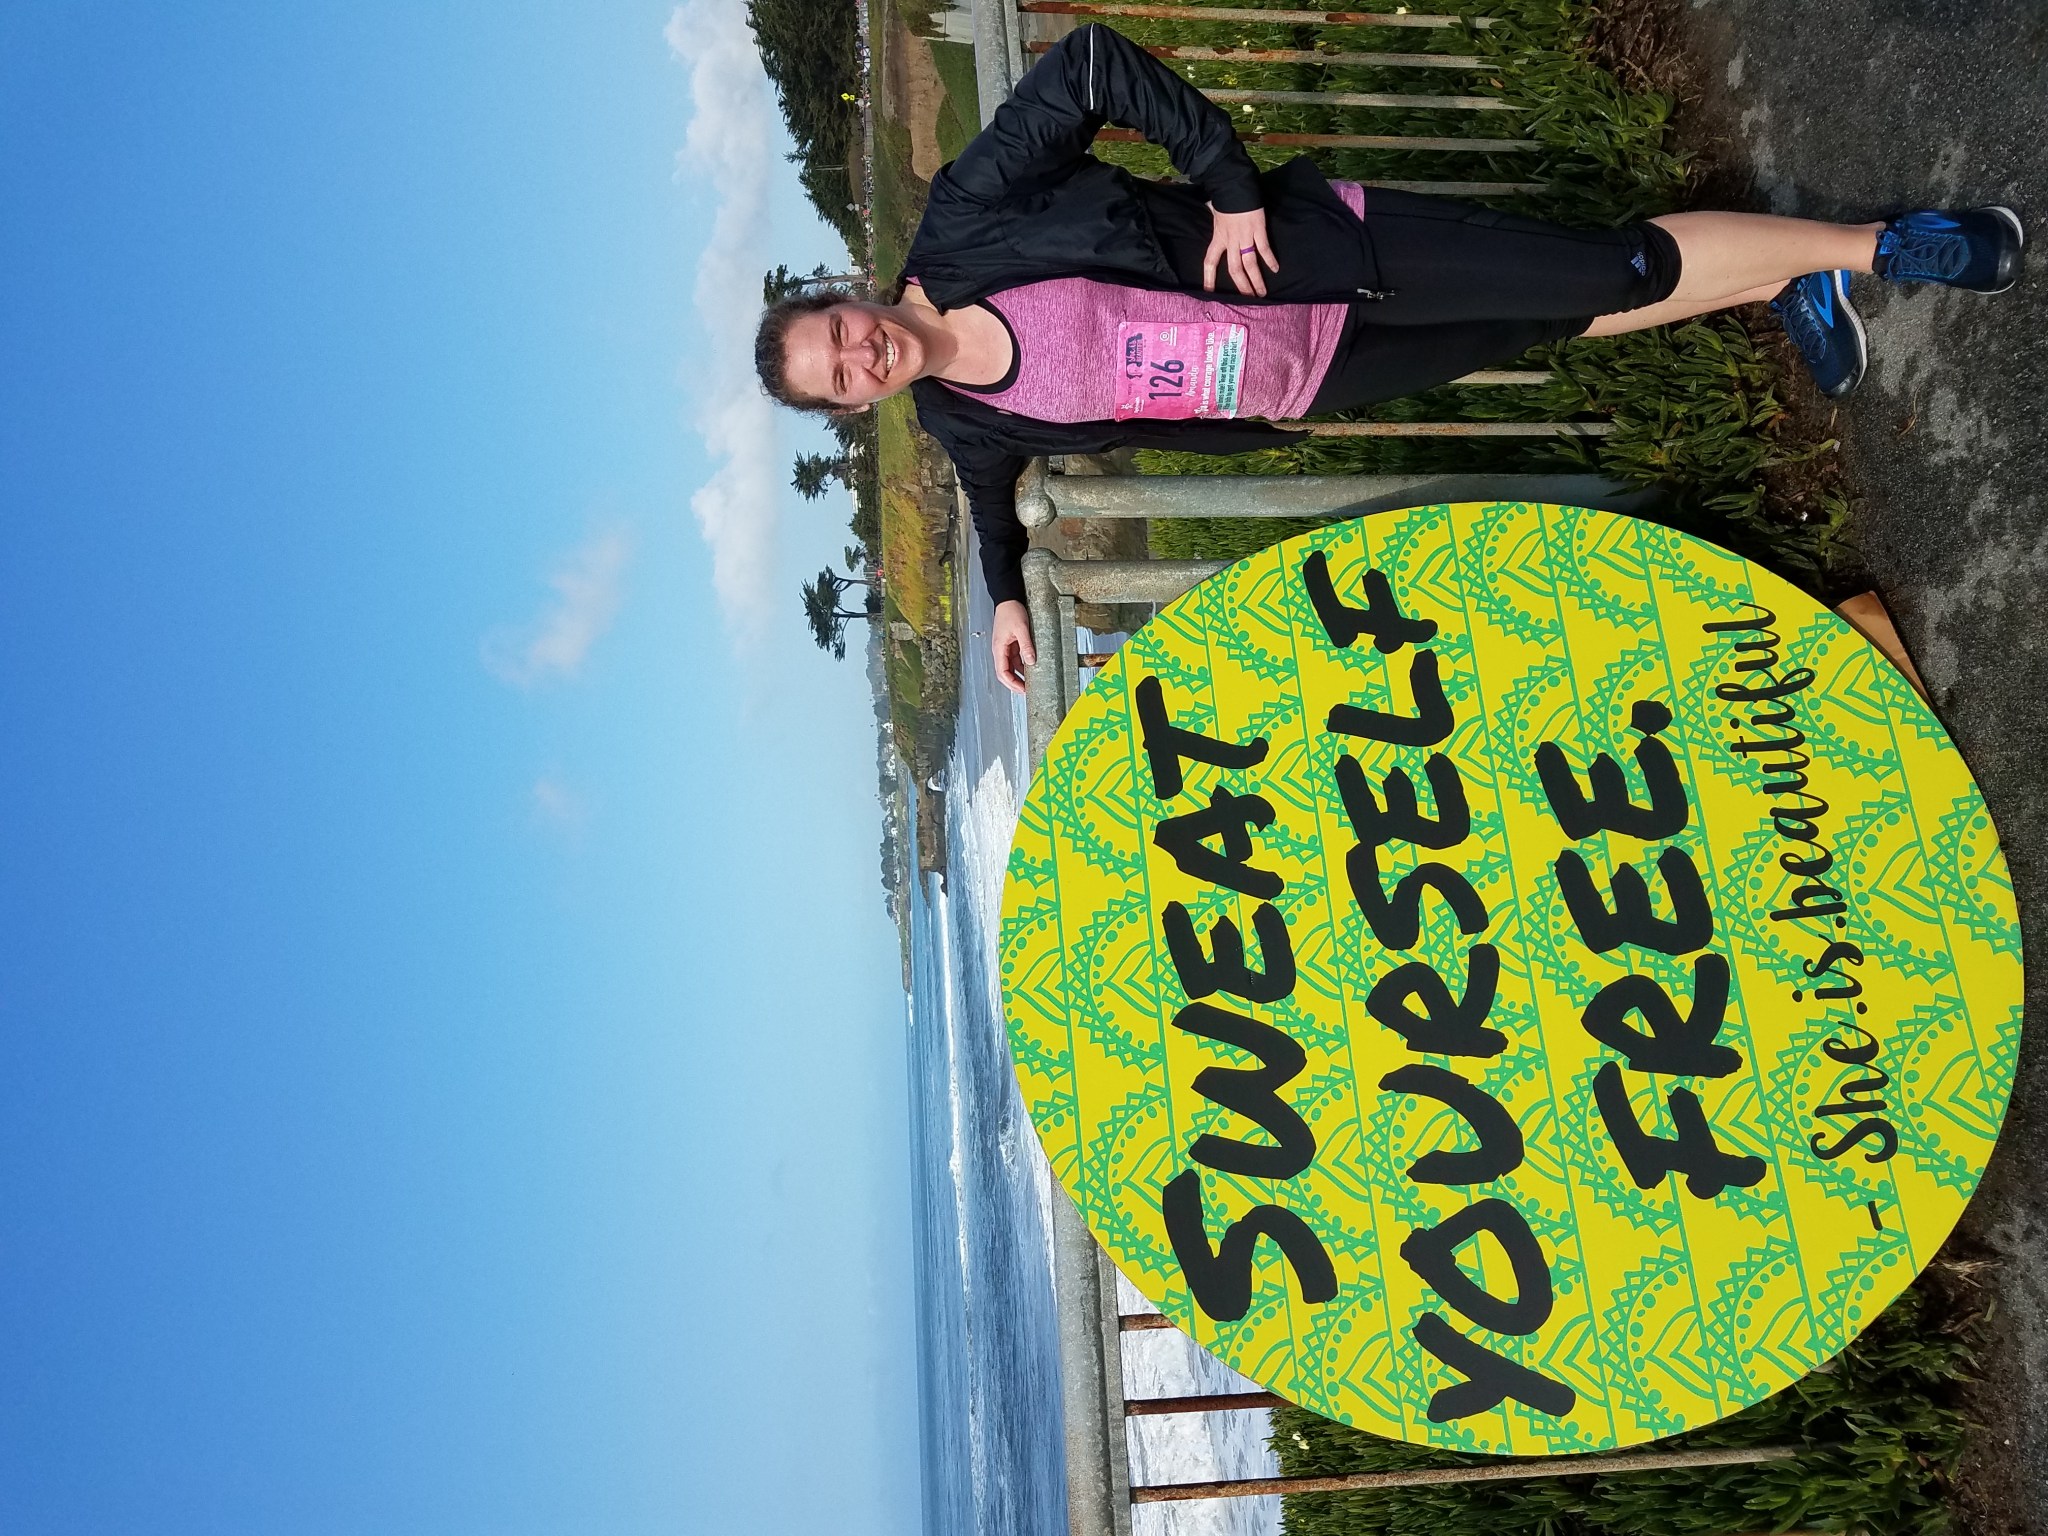 Me after running a 10K in the She Is Beautiful race in Santa Cruz; March 2019